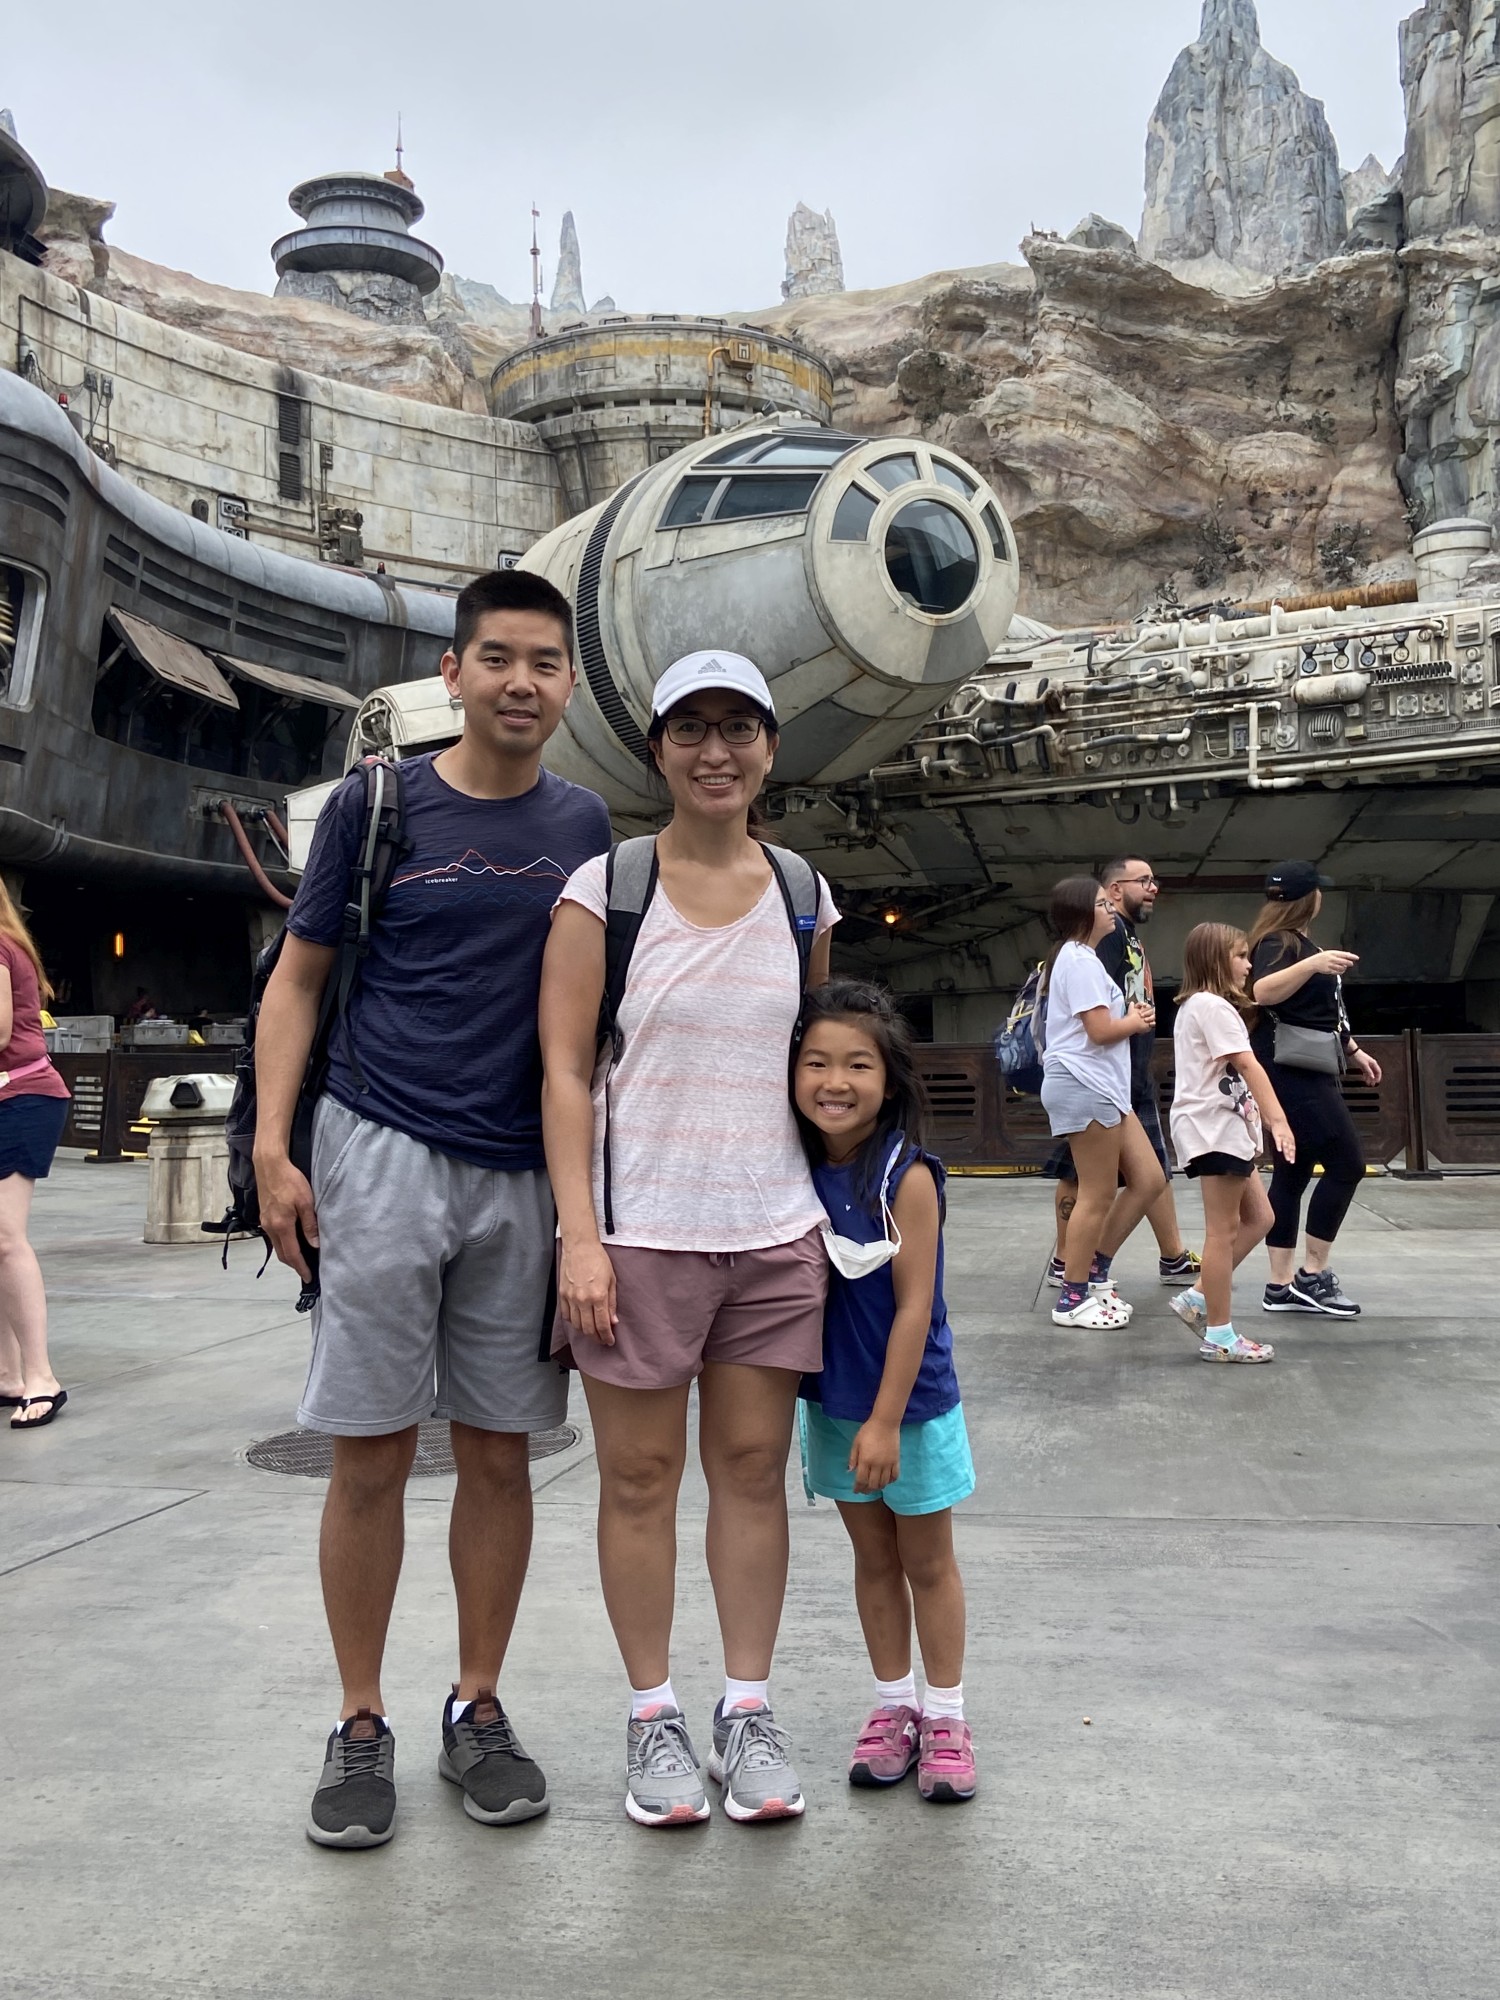 Star Wars Land at Disneyland! Too bad we don't know anything about Star Wars... but Mommy and Daddy liked the rides!